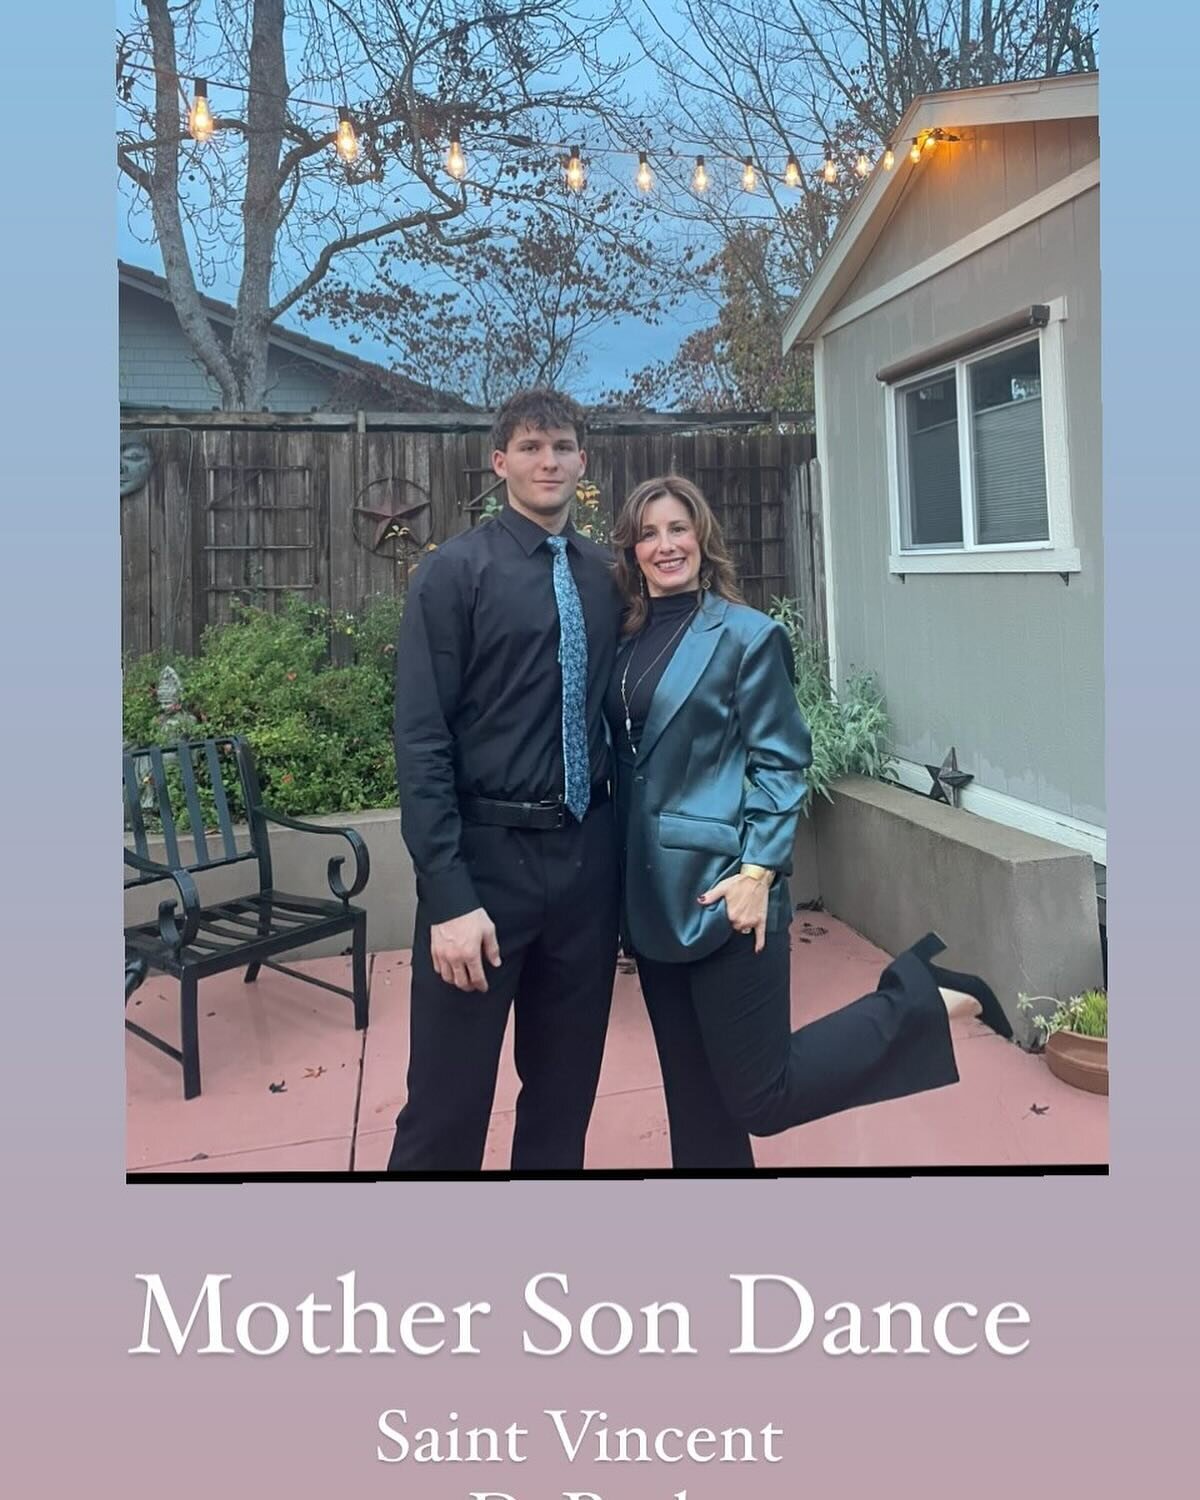 Mother and Son dance! So much fun! 💃🏻❤️🕺🏽